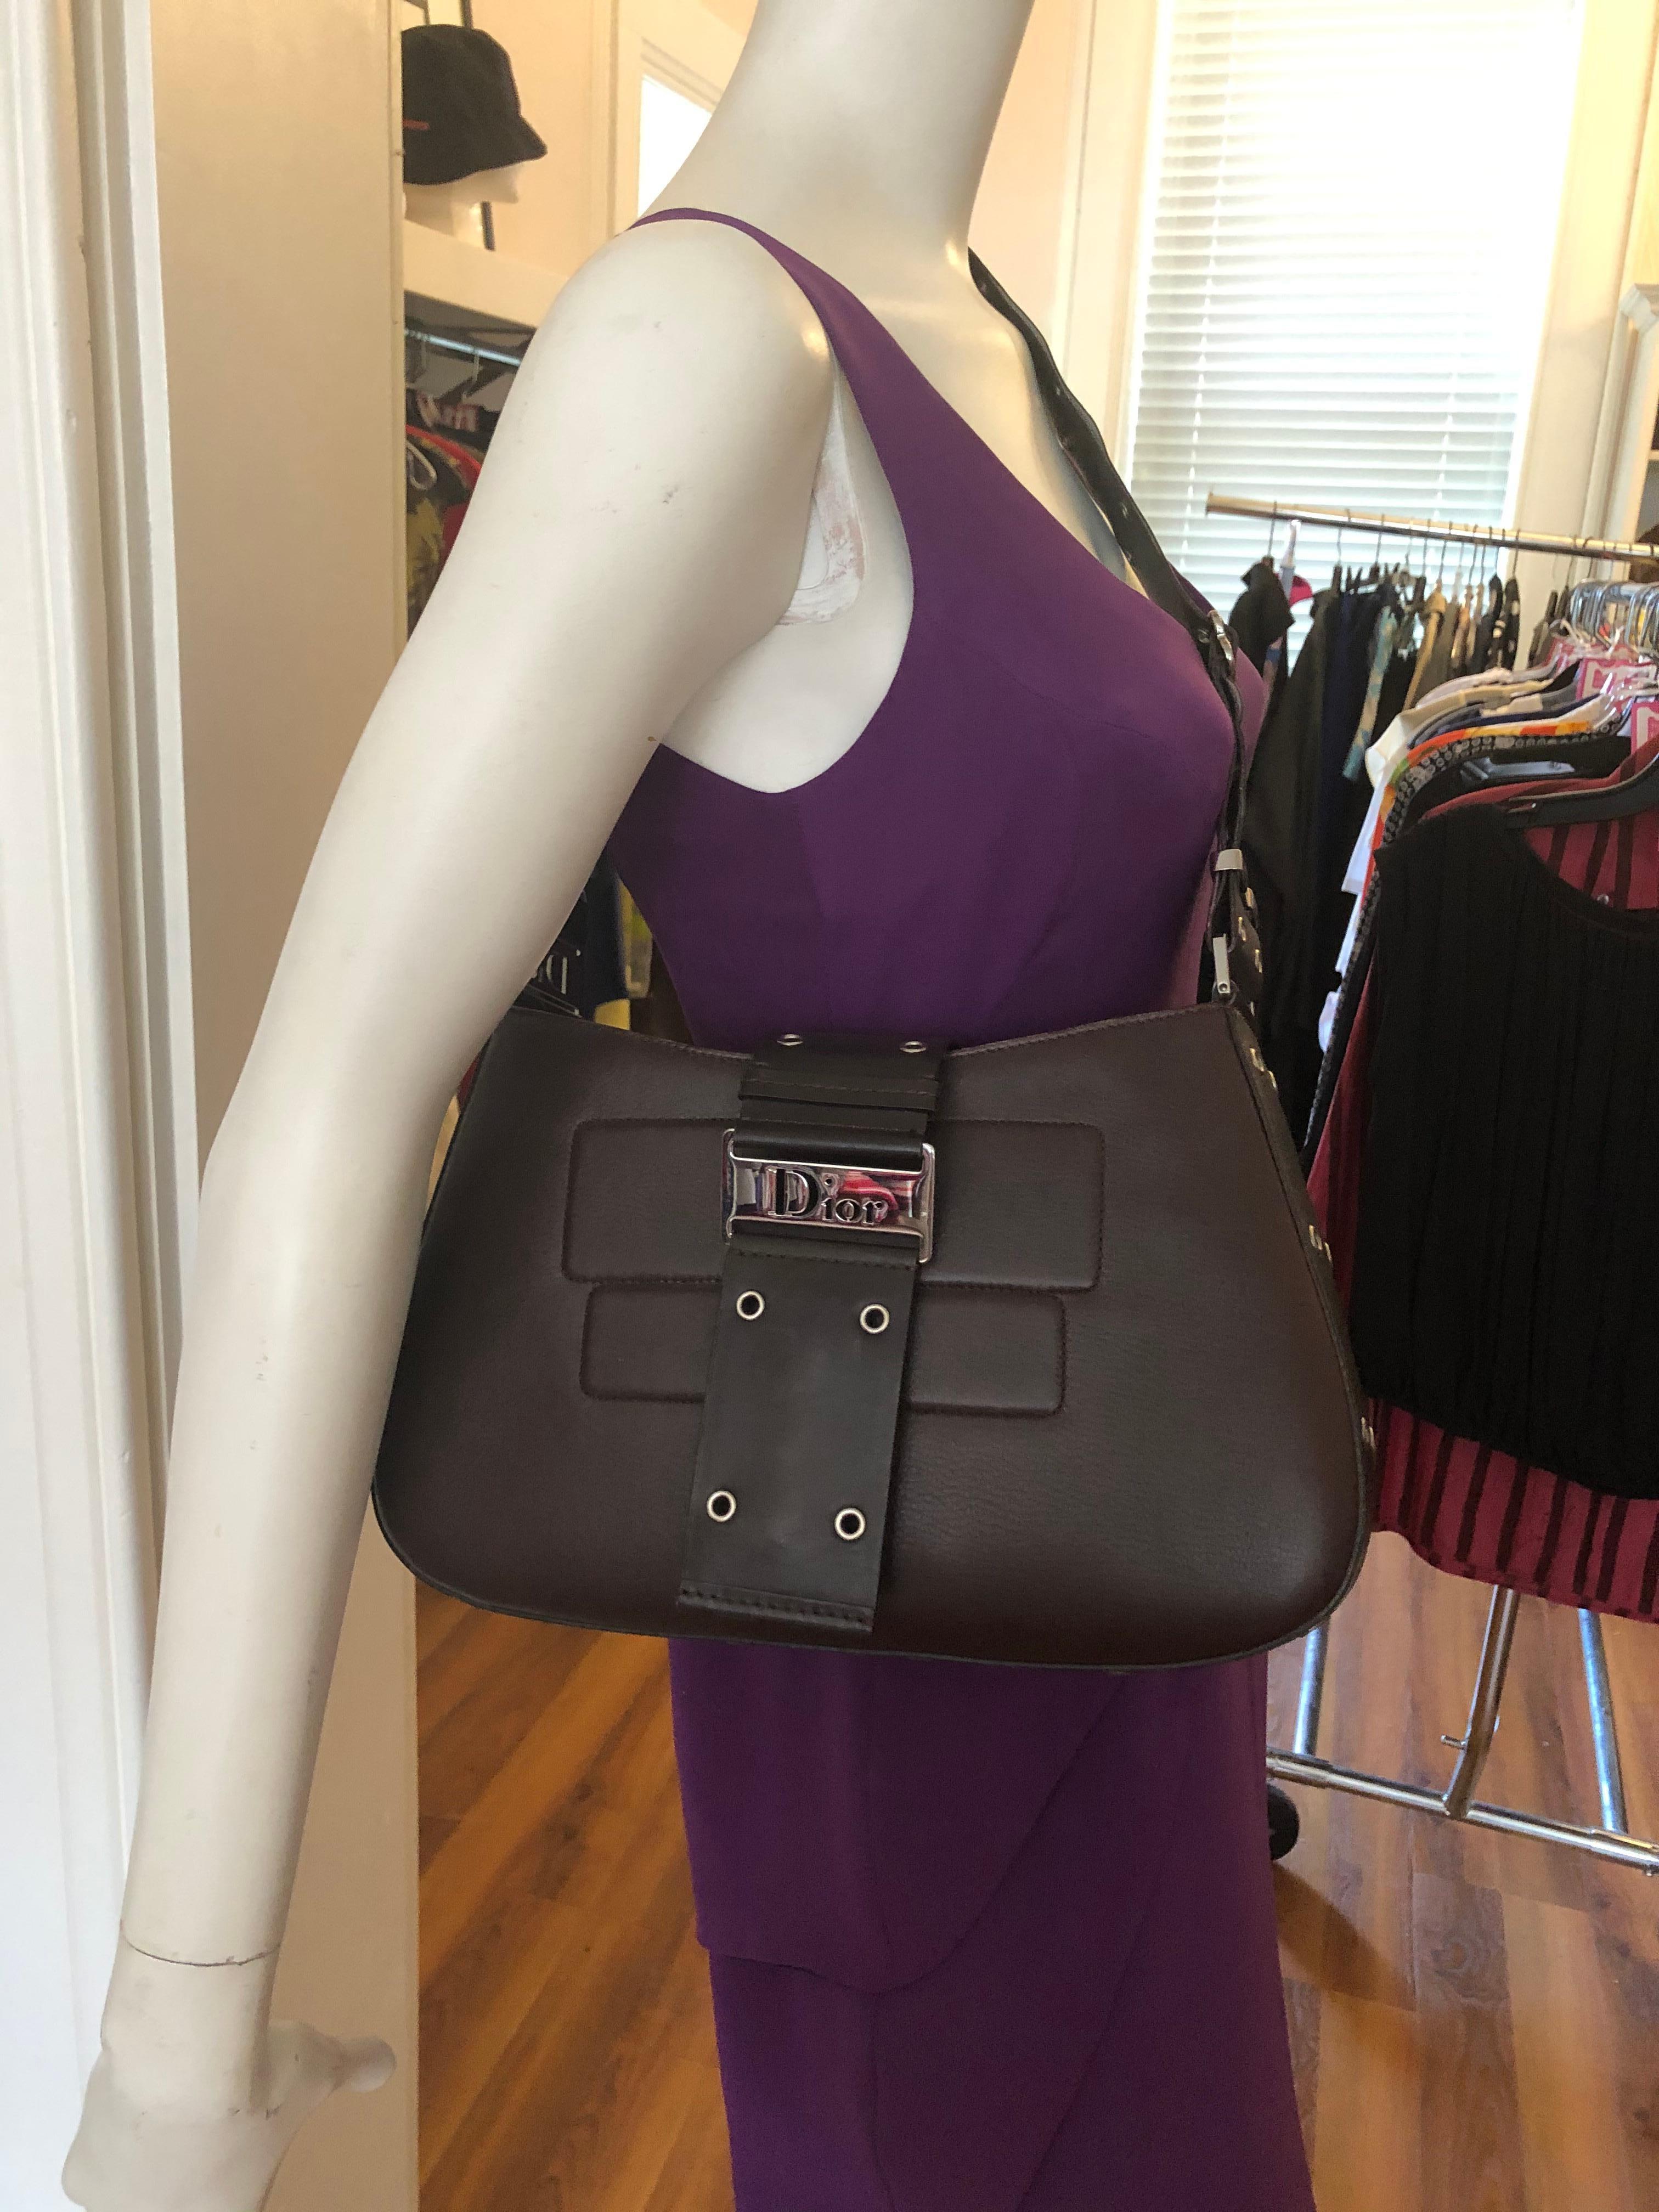 In very good condition this April 2002 (MA-0042) leather bag designed by John Galliano. It can be worn as a crossbody (see pictures), as well as a shoulder bag. It has a flap pocket; grommet accents; silver hardware; an outside back slit pocket, and